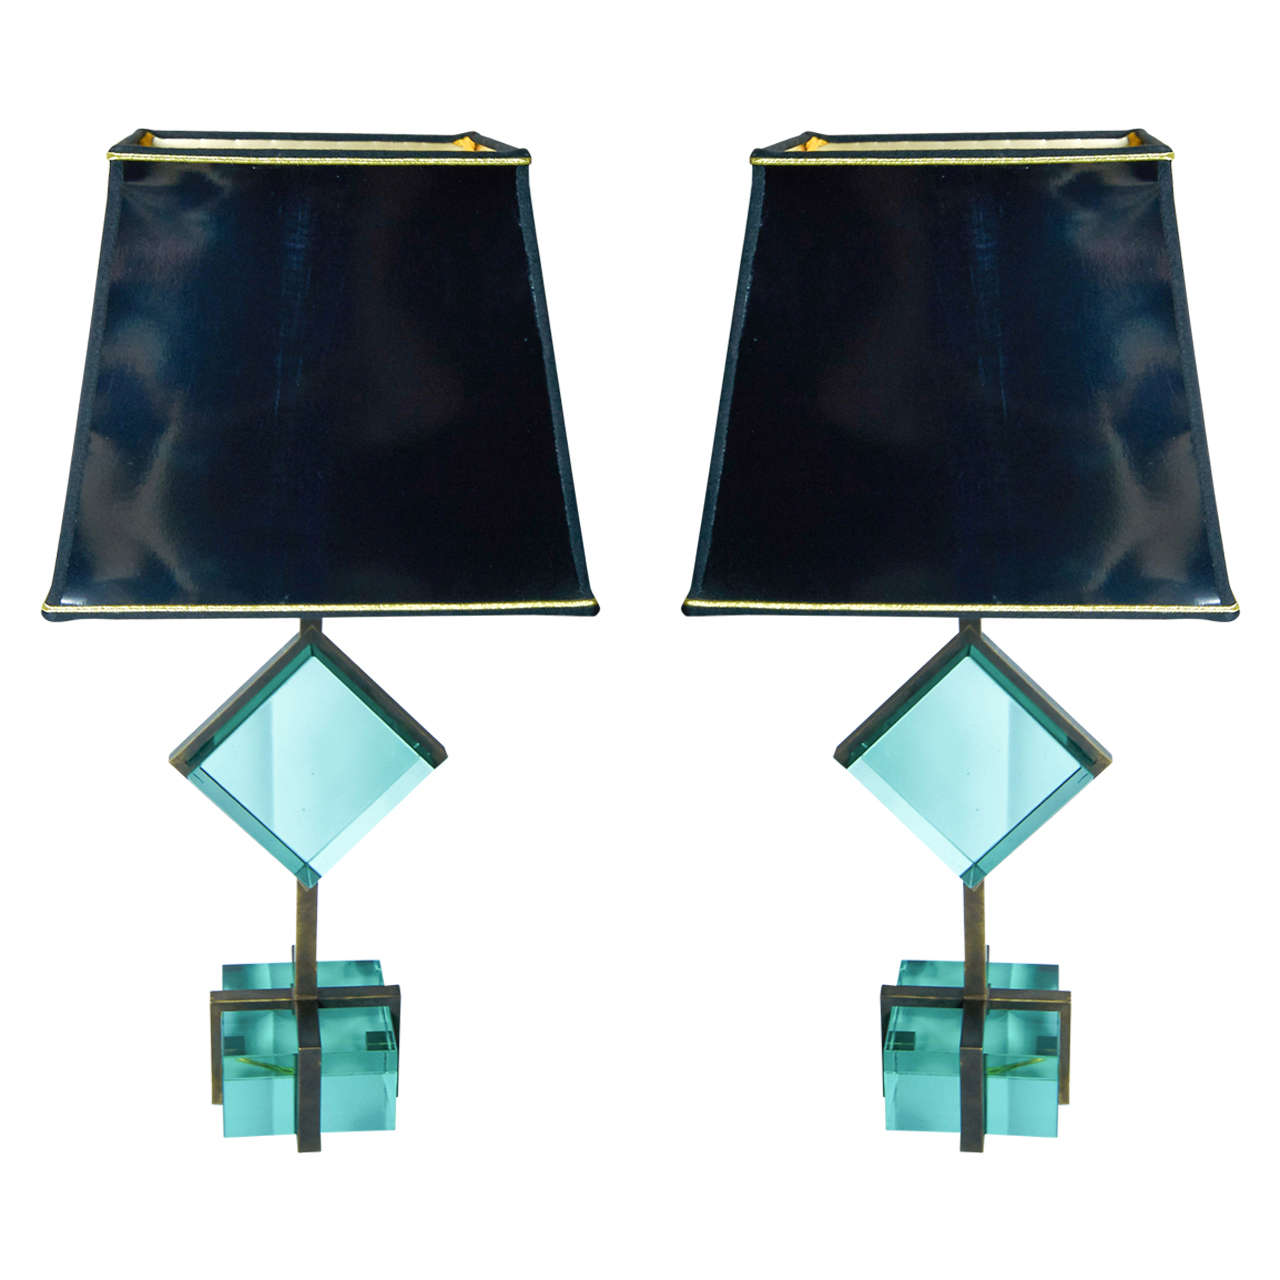 Impactful Pair of Murano Glass Table Lamps by Vistosi, 1960s